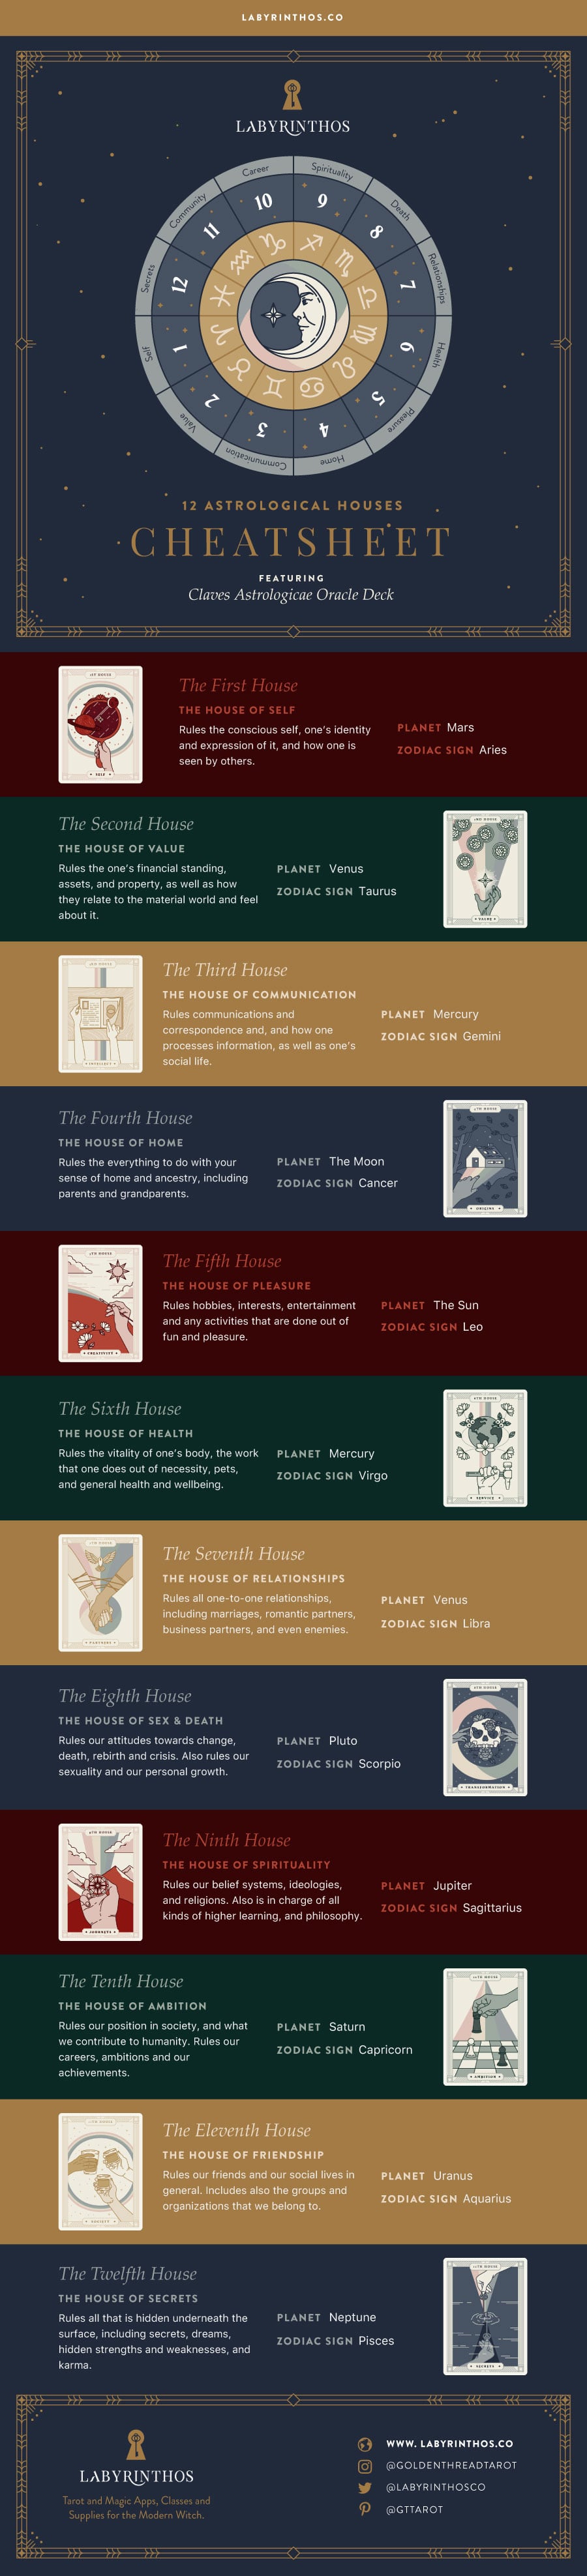 12 Houses of Astrology: All 12 Houses Cheat Sheet and Infographic